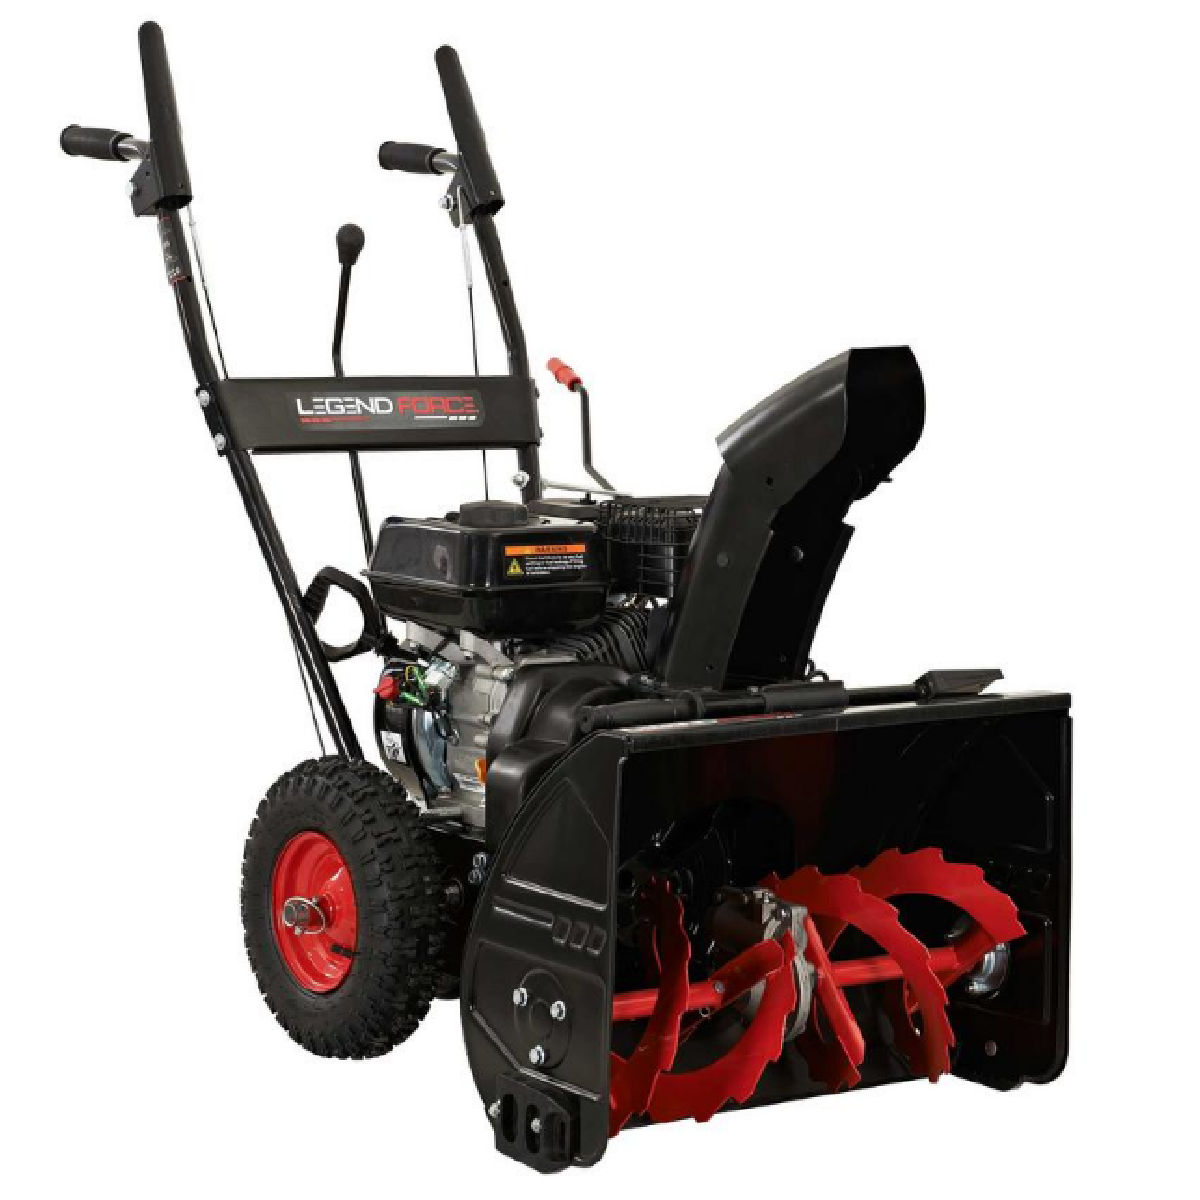 Legend Force THDSKU2 22-Inch Two-Stage Gas Snow Blower